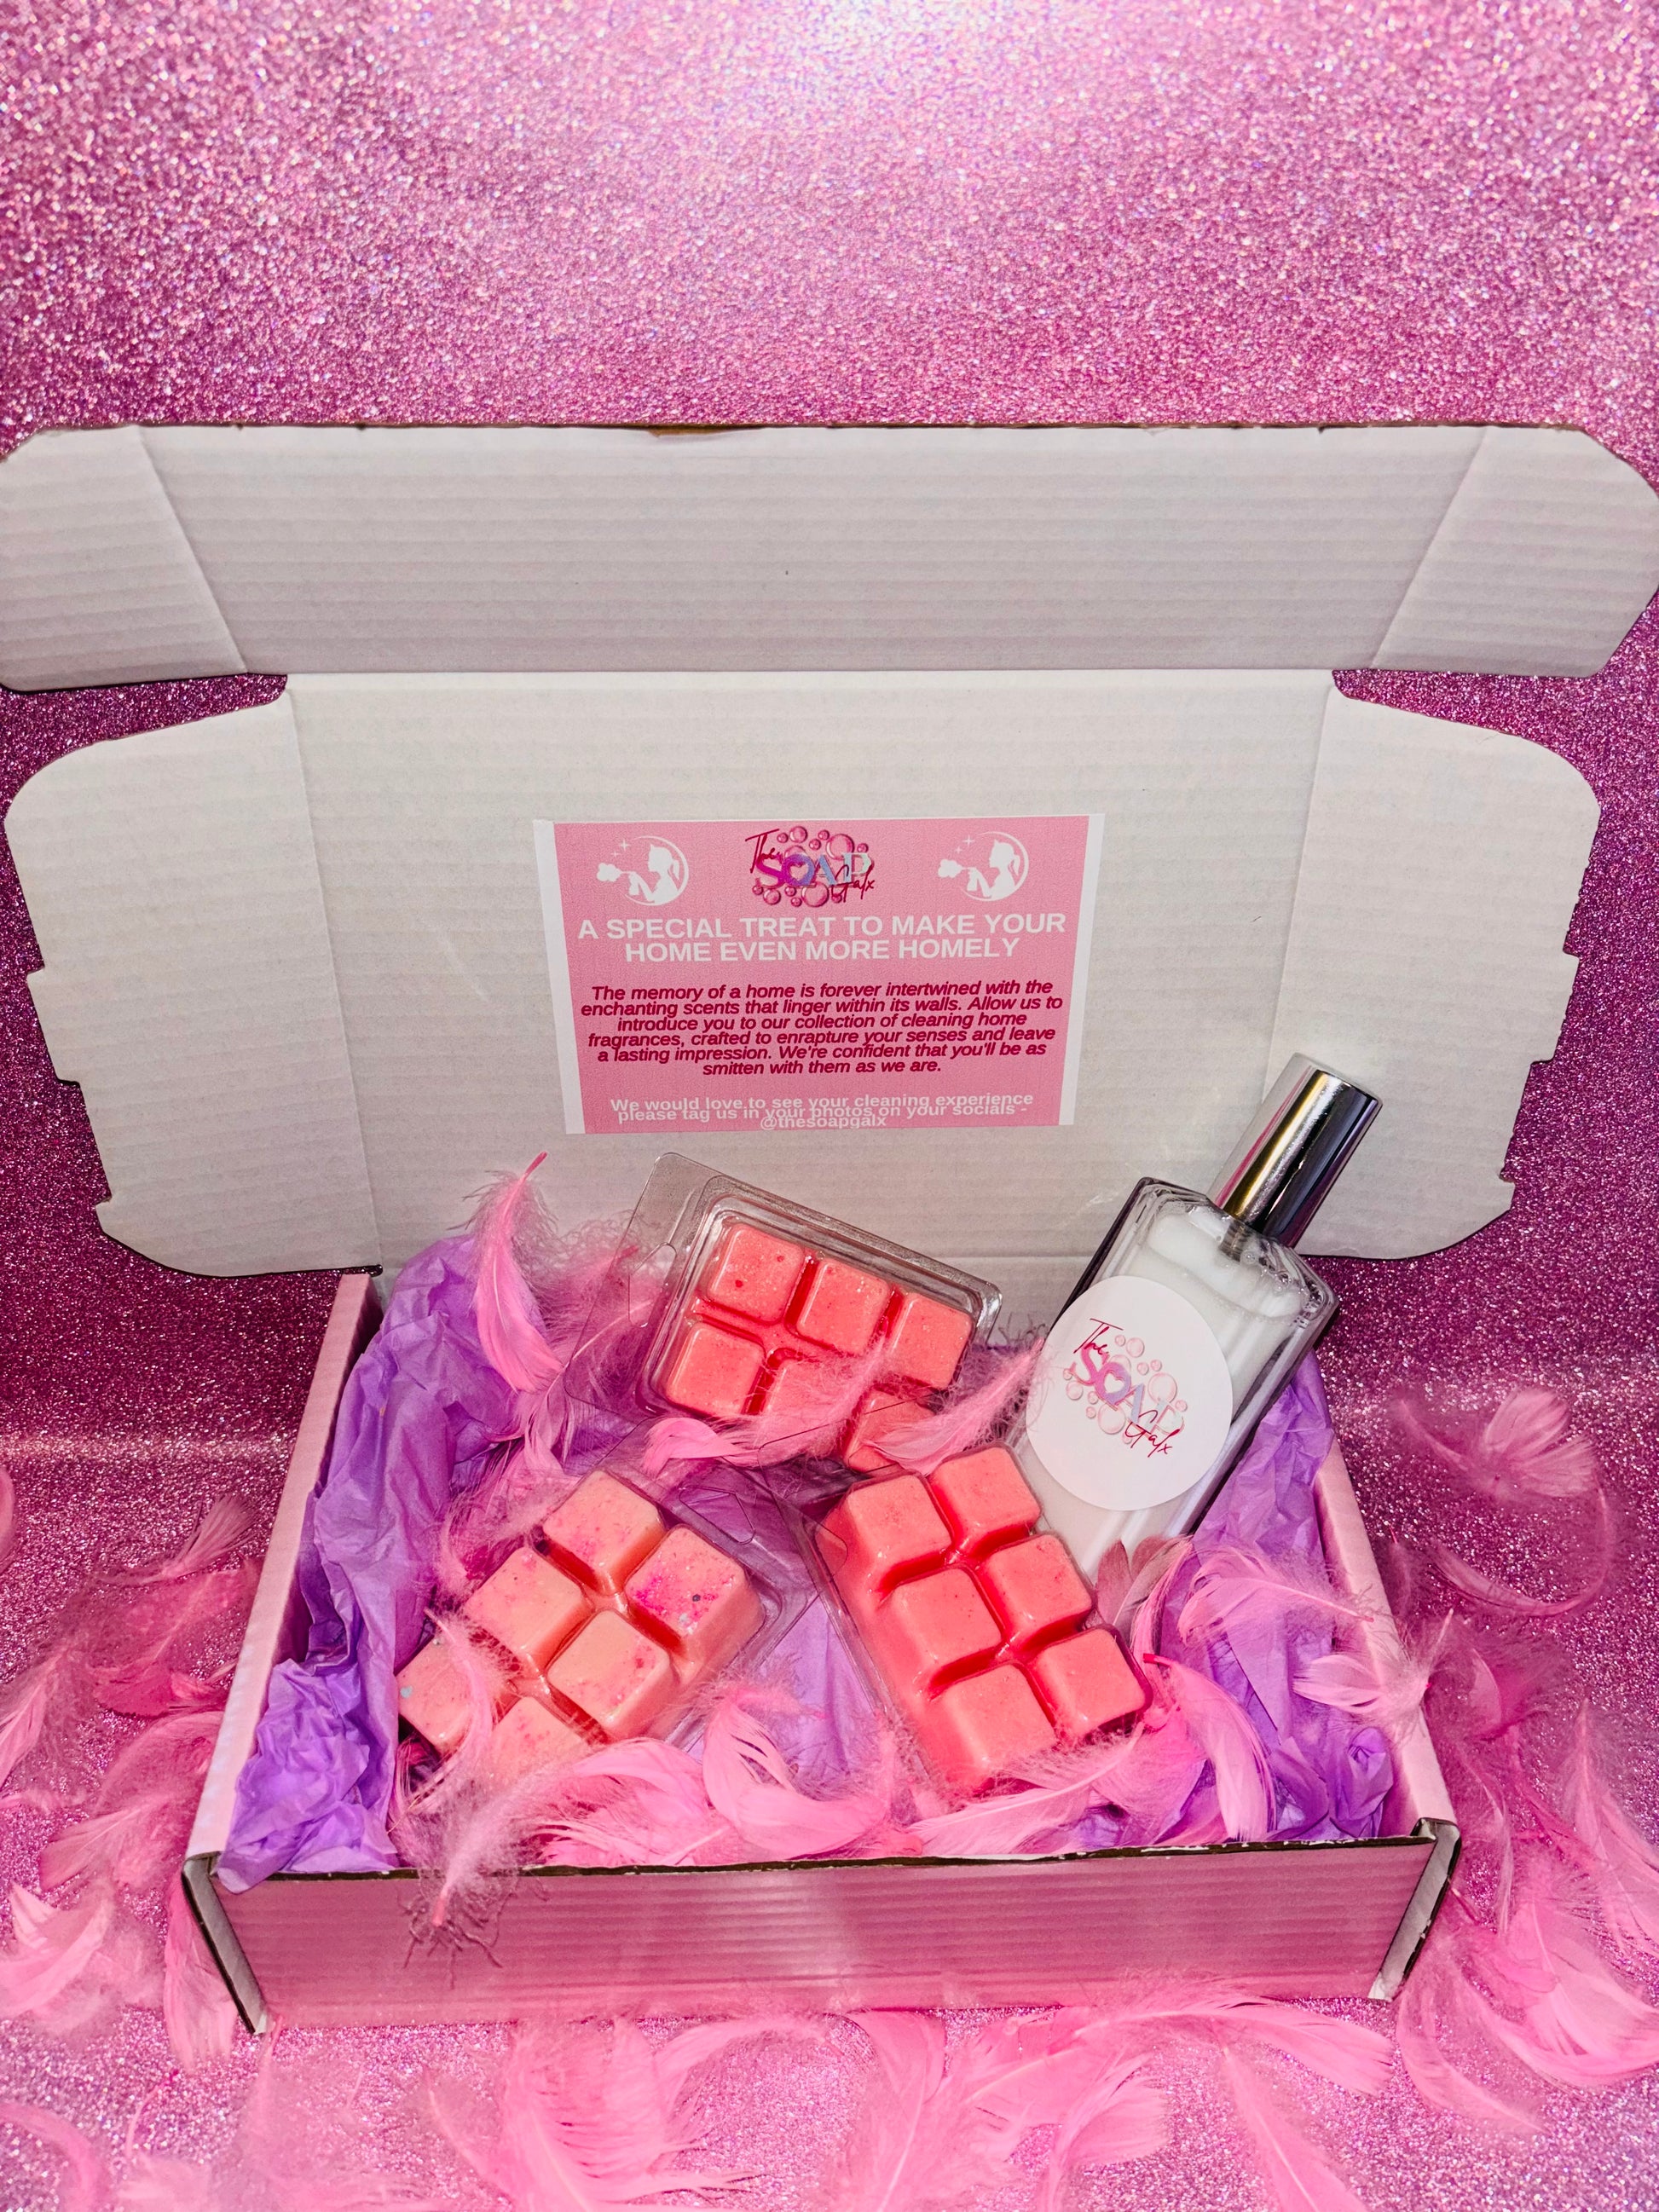 An Ice Pixie Wax Melt Gift Set - 3 Wax Melts & 1 Room Spray by The Soap Gal x, with pink wax melts enclosed in a pink box.